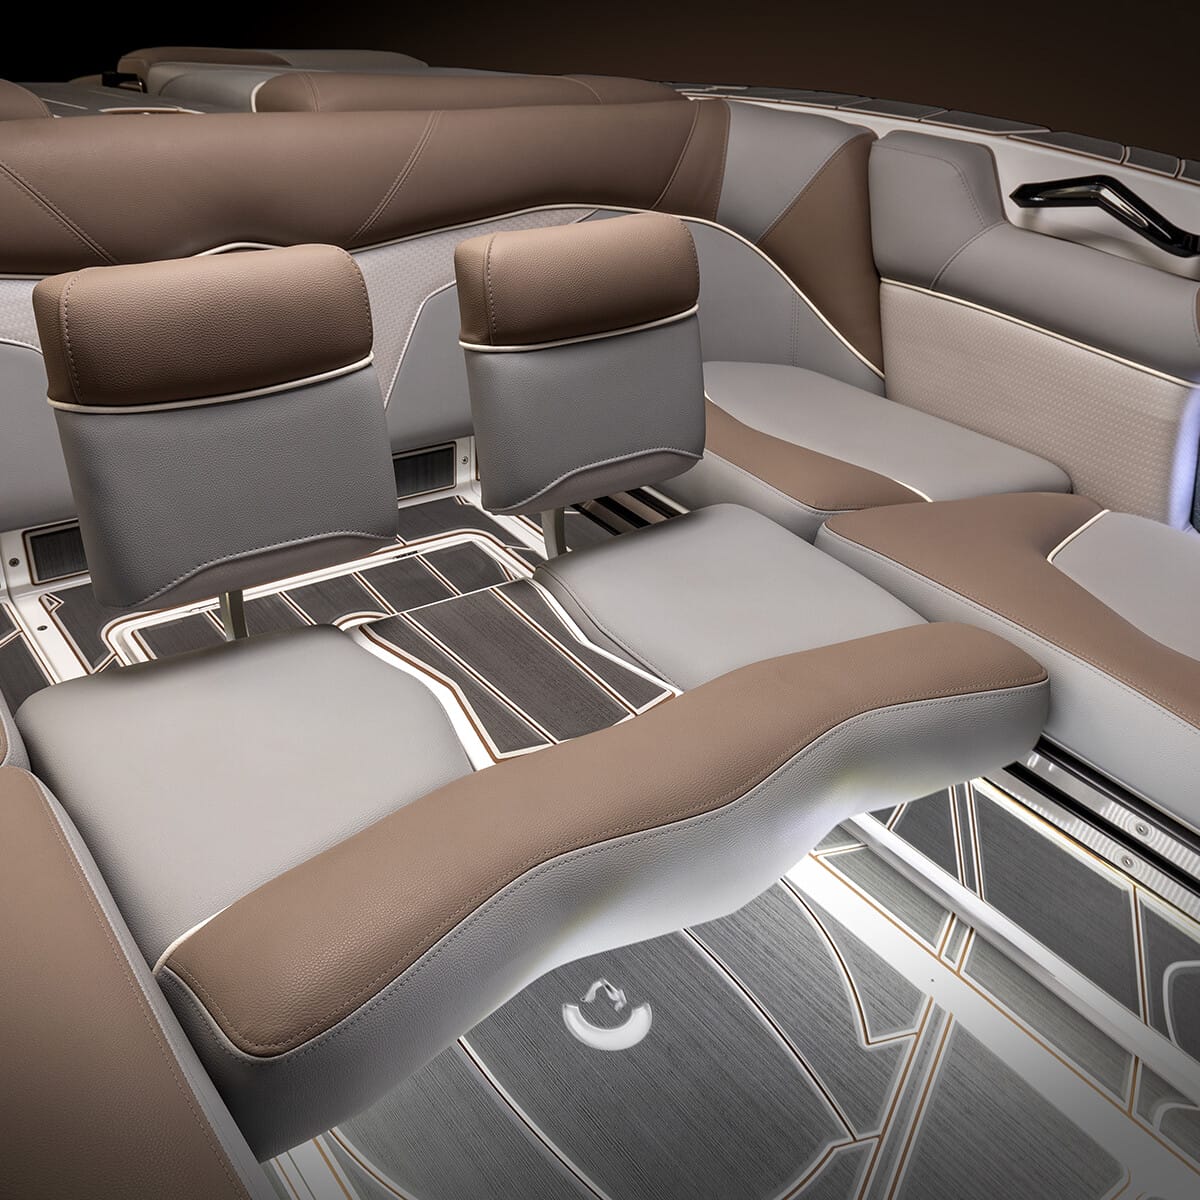 Interior of a modern boat with cushioned seats and armrests, featuring a brown and gray color scheme, built-in speakers, and potentially convertible seating for lounging.